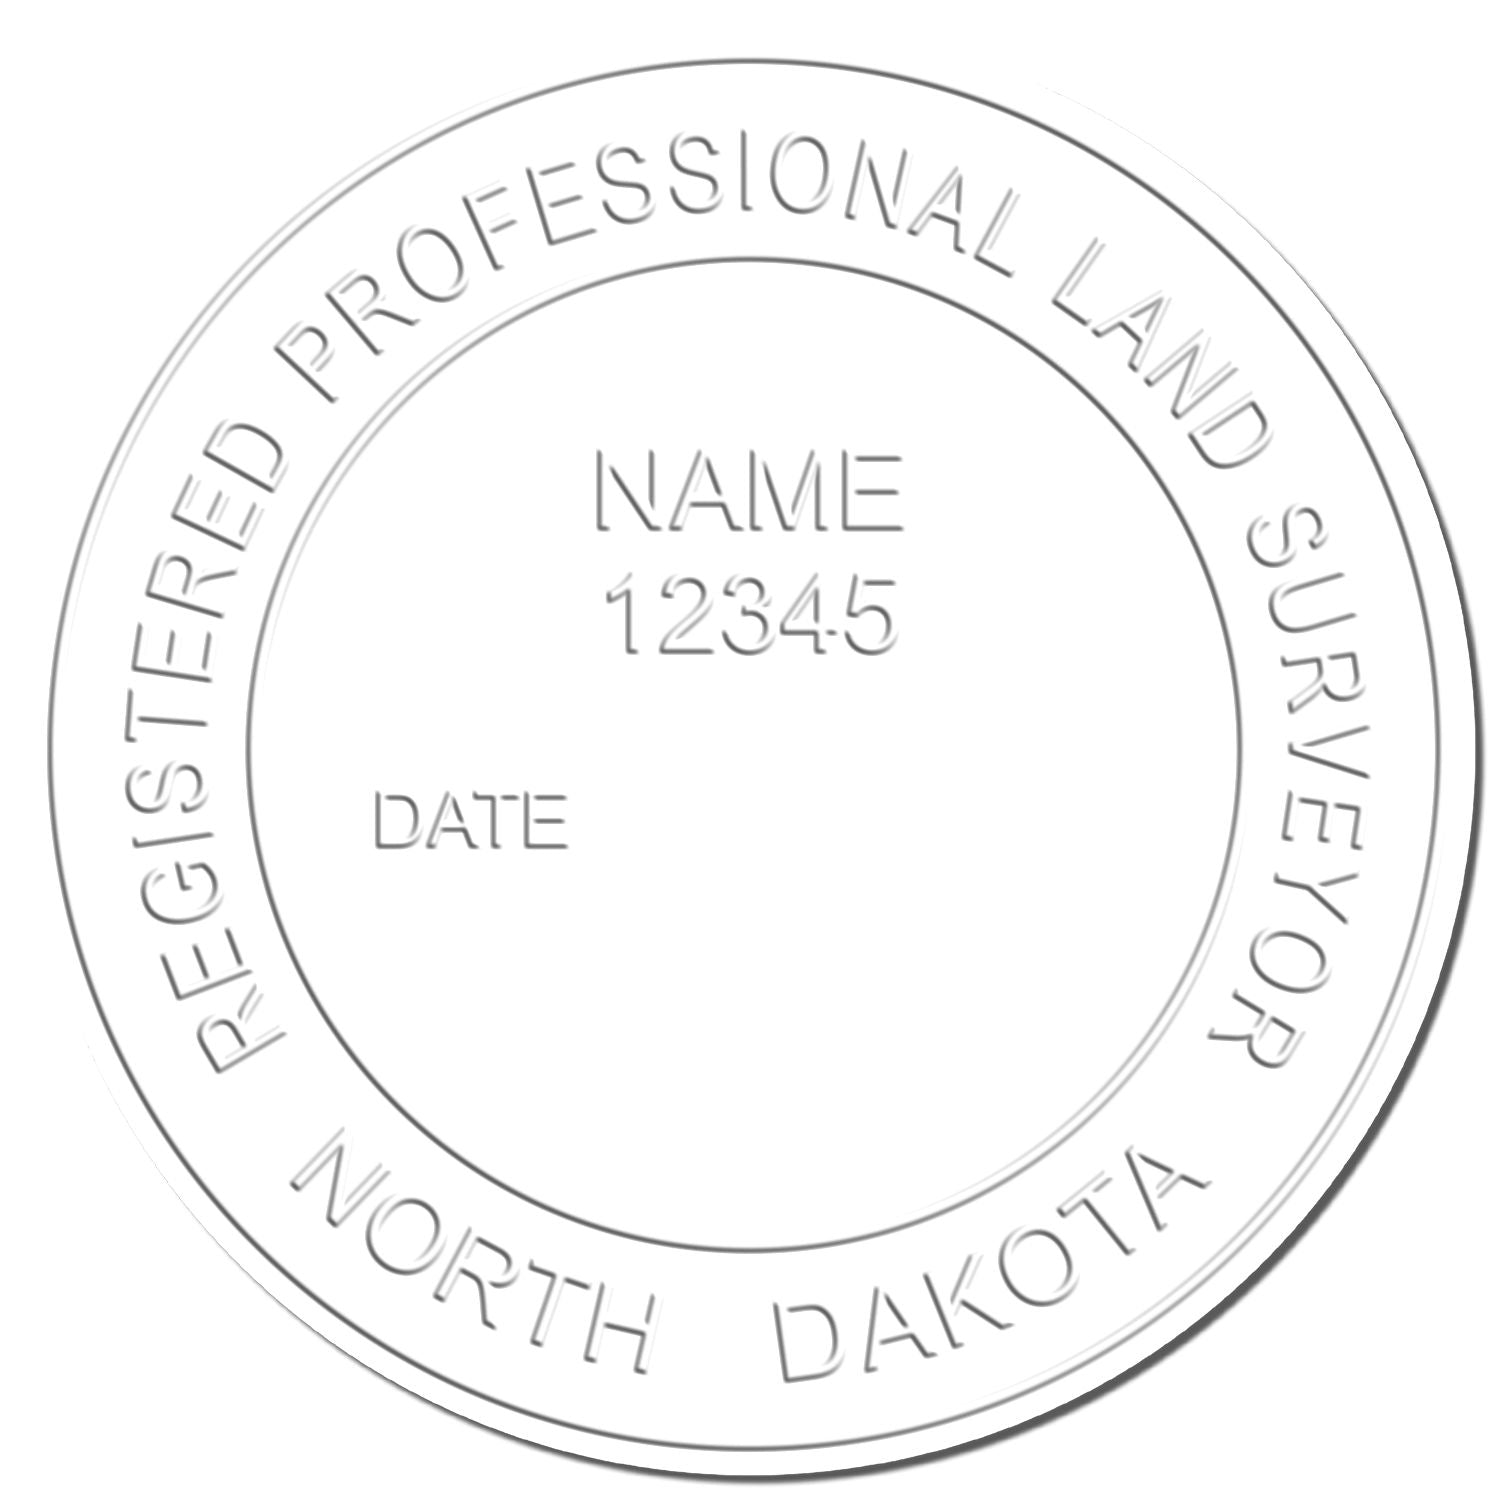 This paper is stamped with a sample imprint of the Heavy Duty Cast Iron North Dakota Land Surveyor Seal Embosser, signifying its quality and reliability.